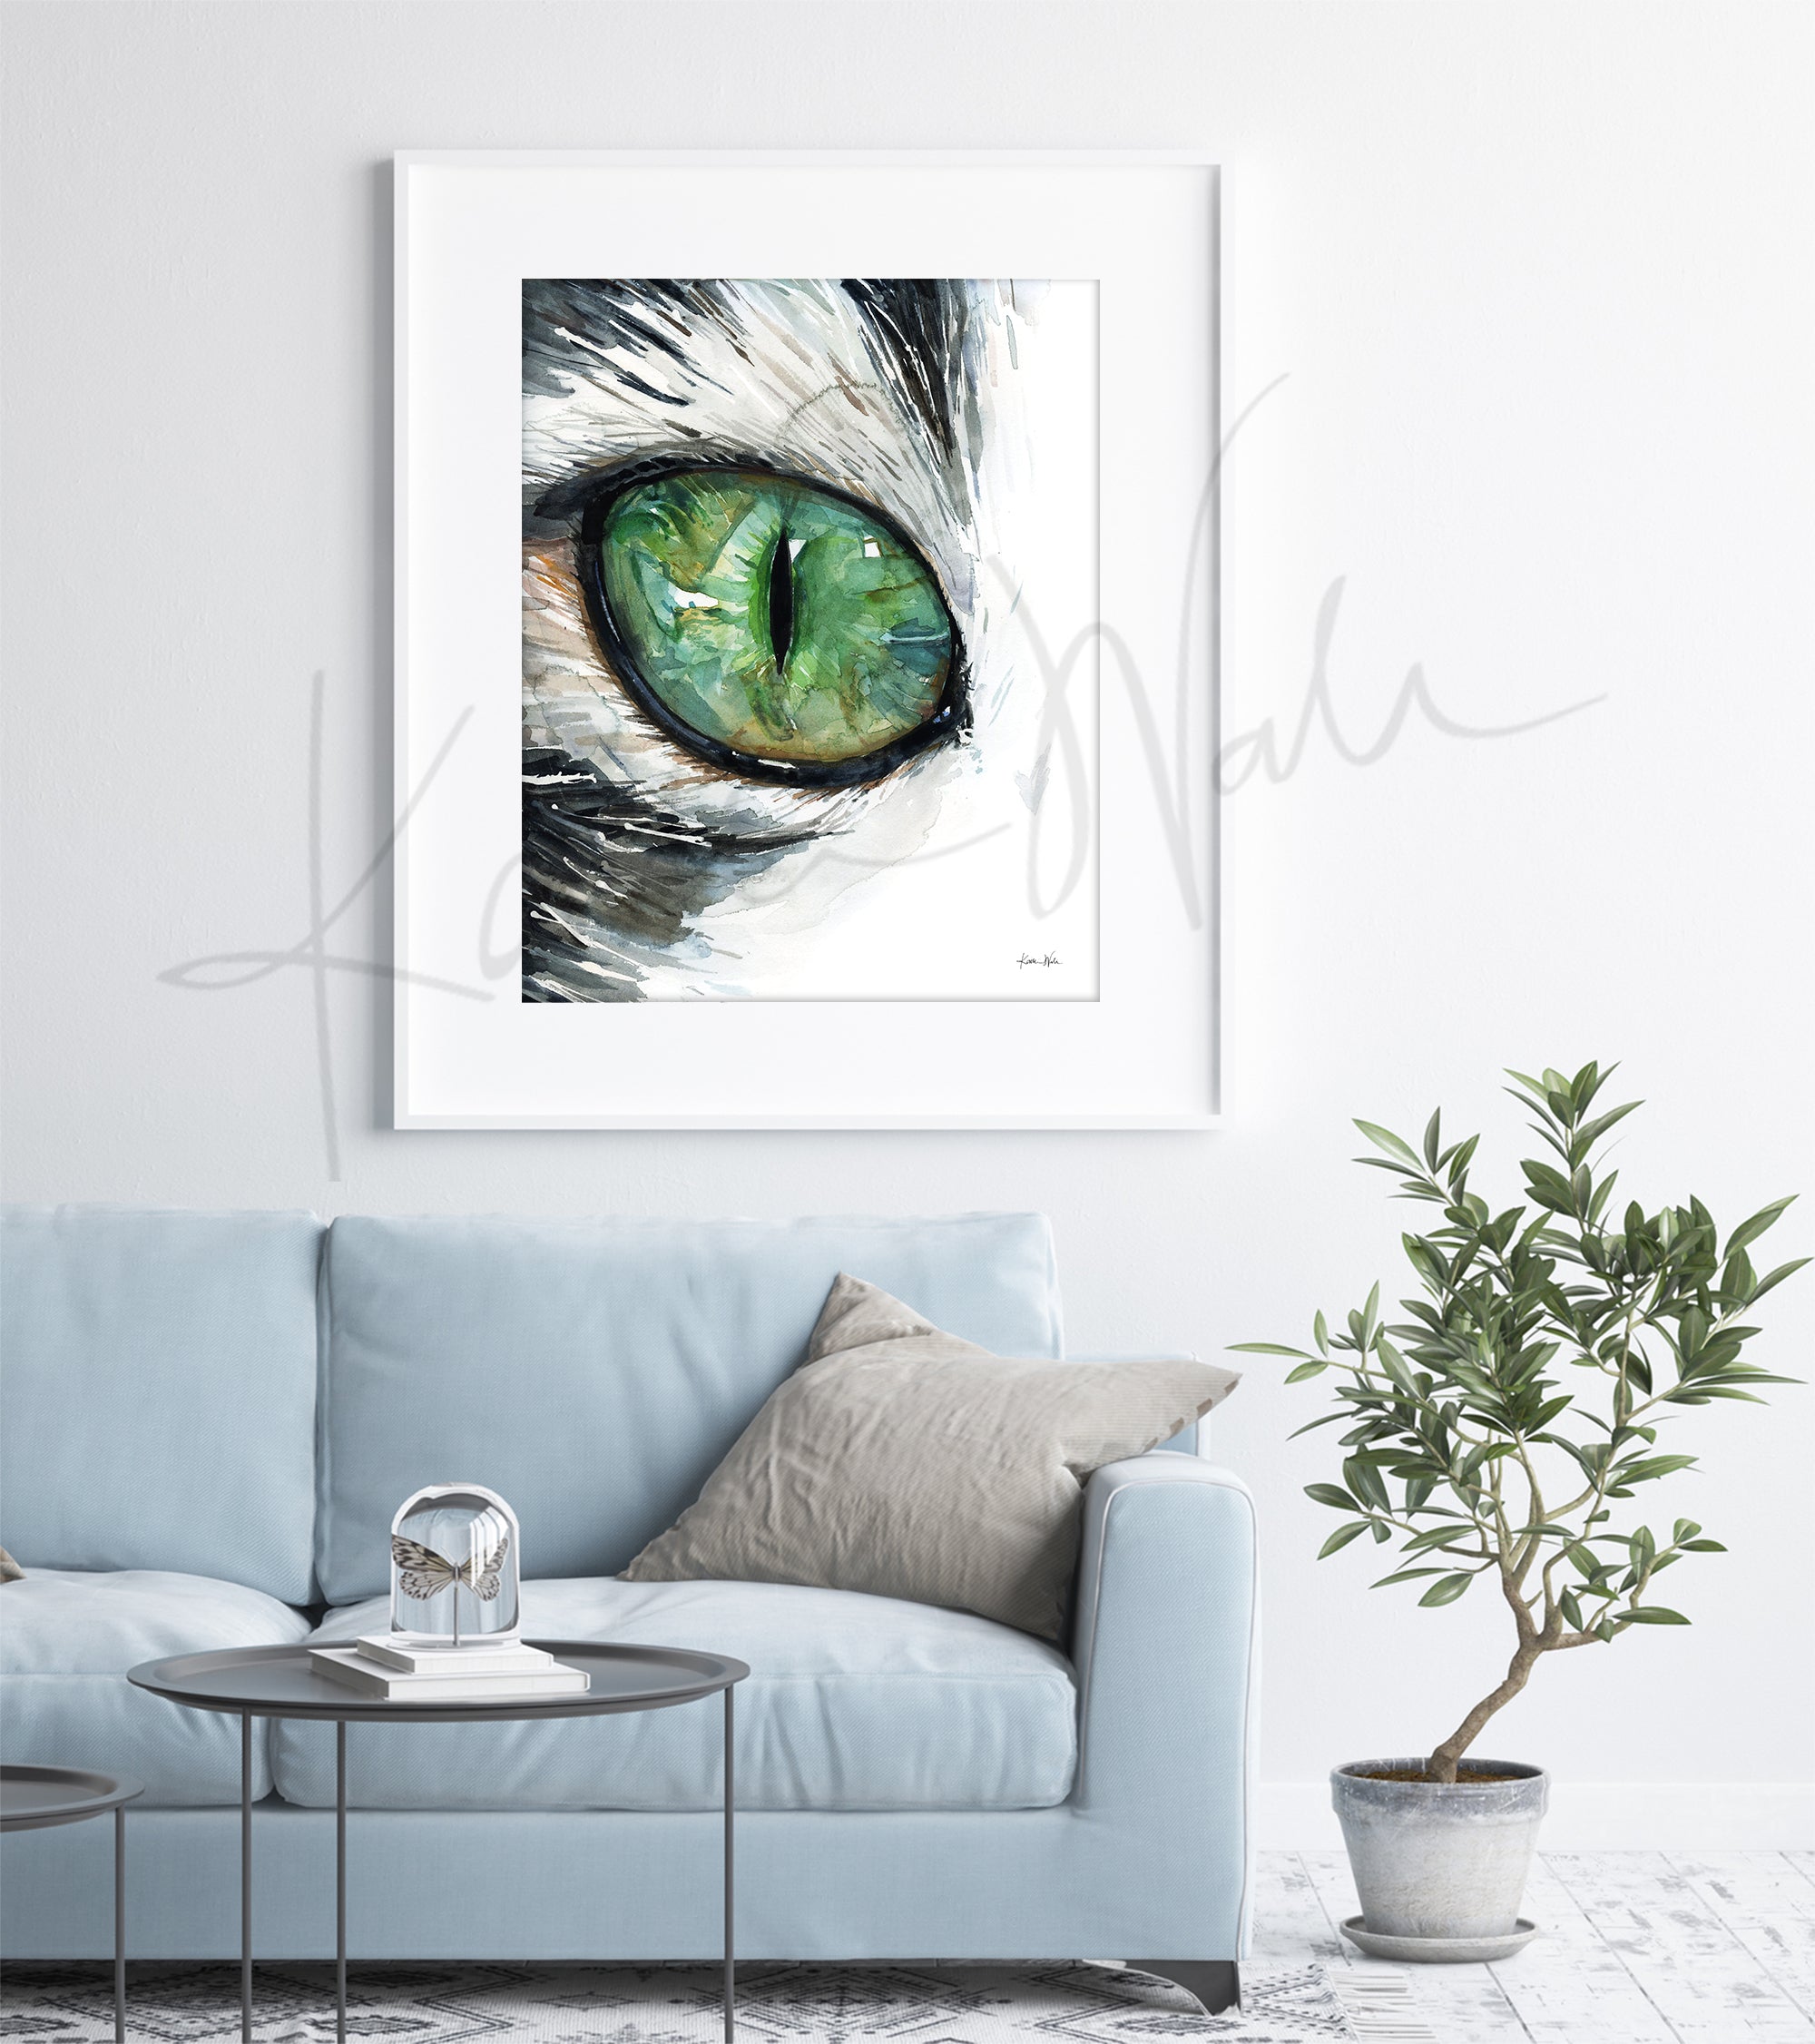 Framed watercolor painting of a zoomed in perspective of a green cat's eye. The hair surrounding the eye is black and white. The painting is hanging over a blue couch.